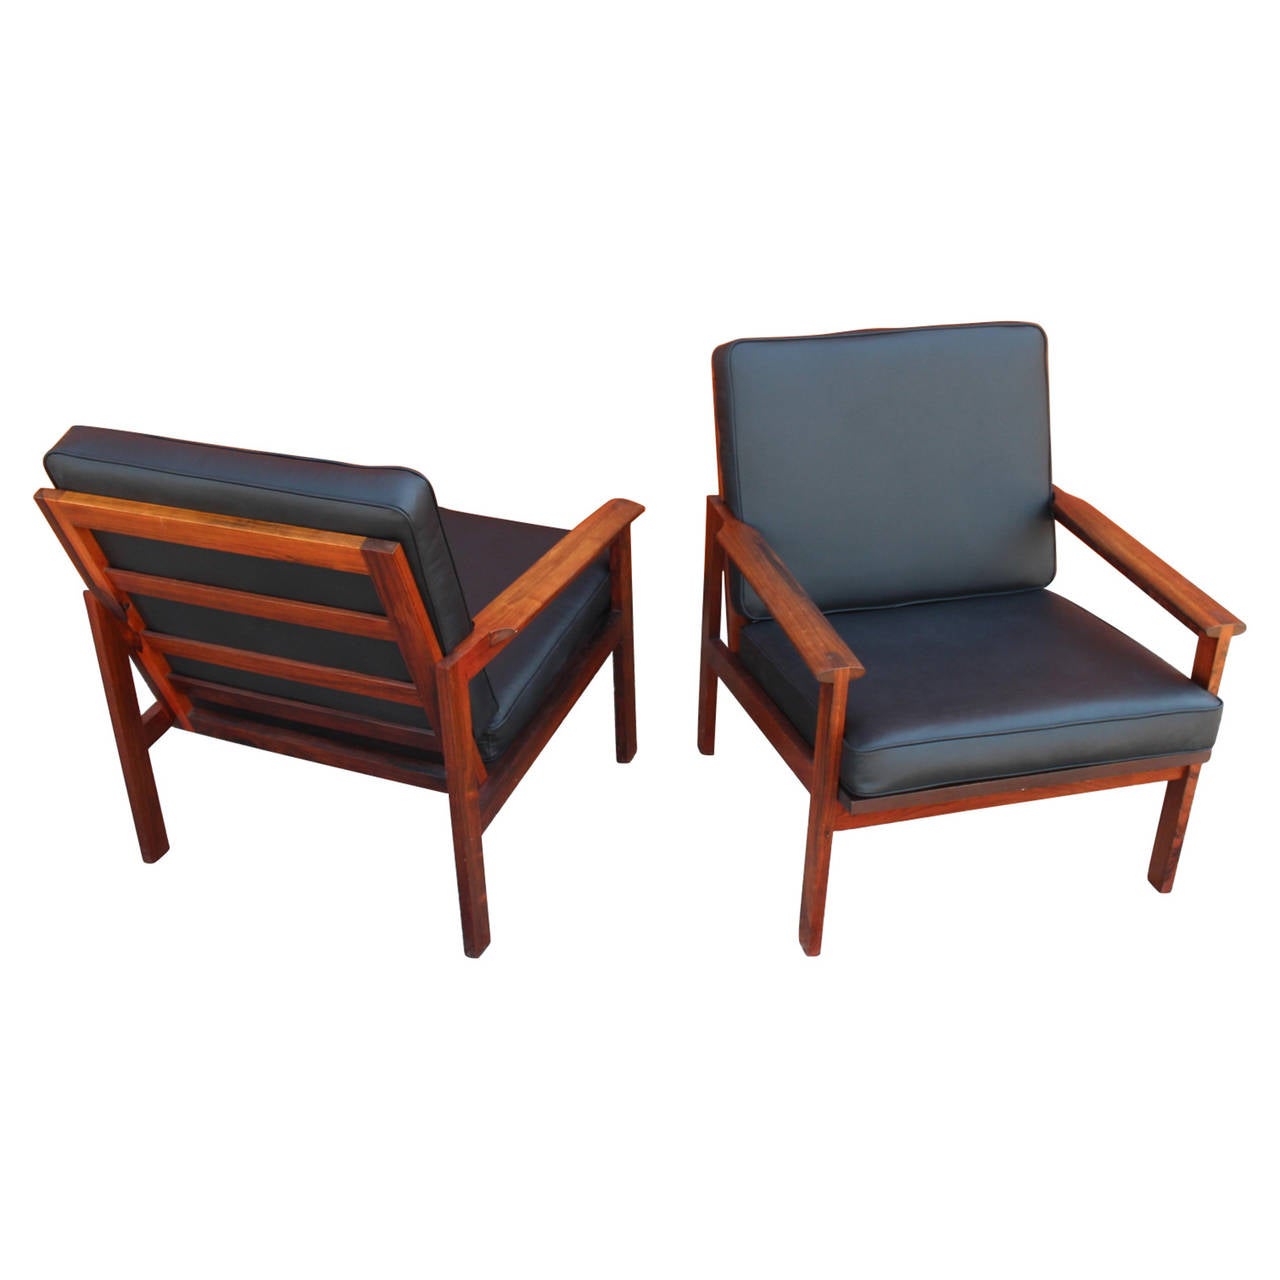 A pair of armchairs by Illum Wikkelsø of the Capella series and manufactured by N. Eilersen. The chairs are from the 1960s and in rosewood with black leather cushions.